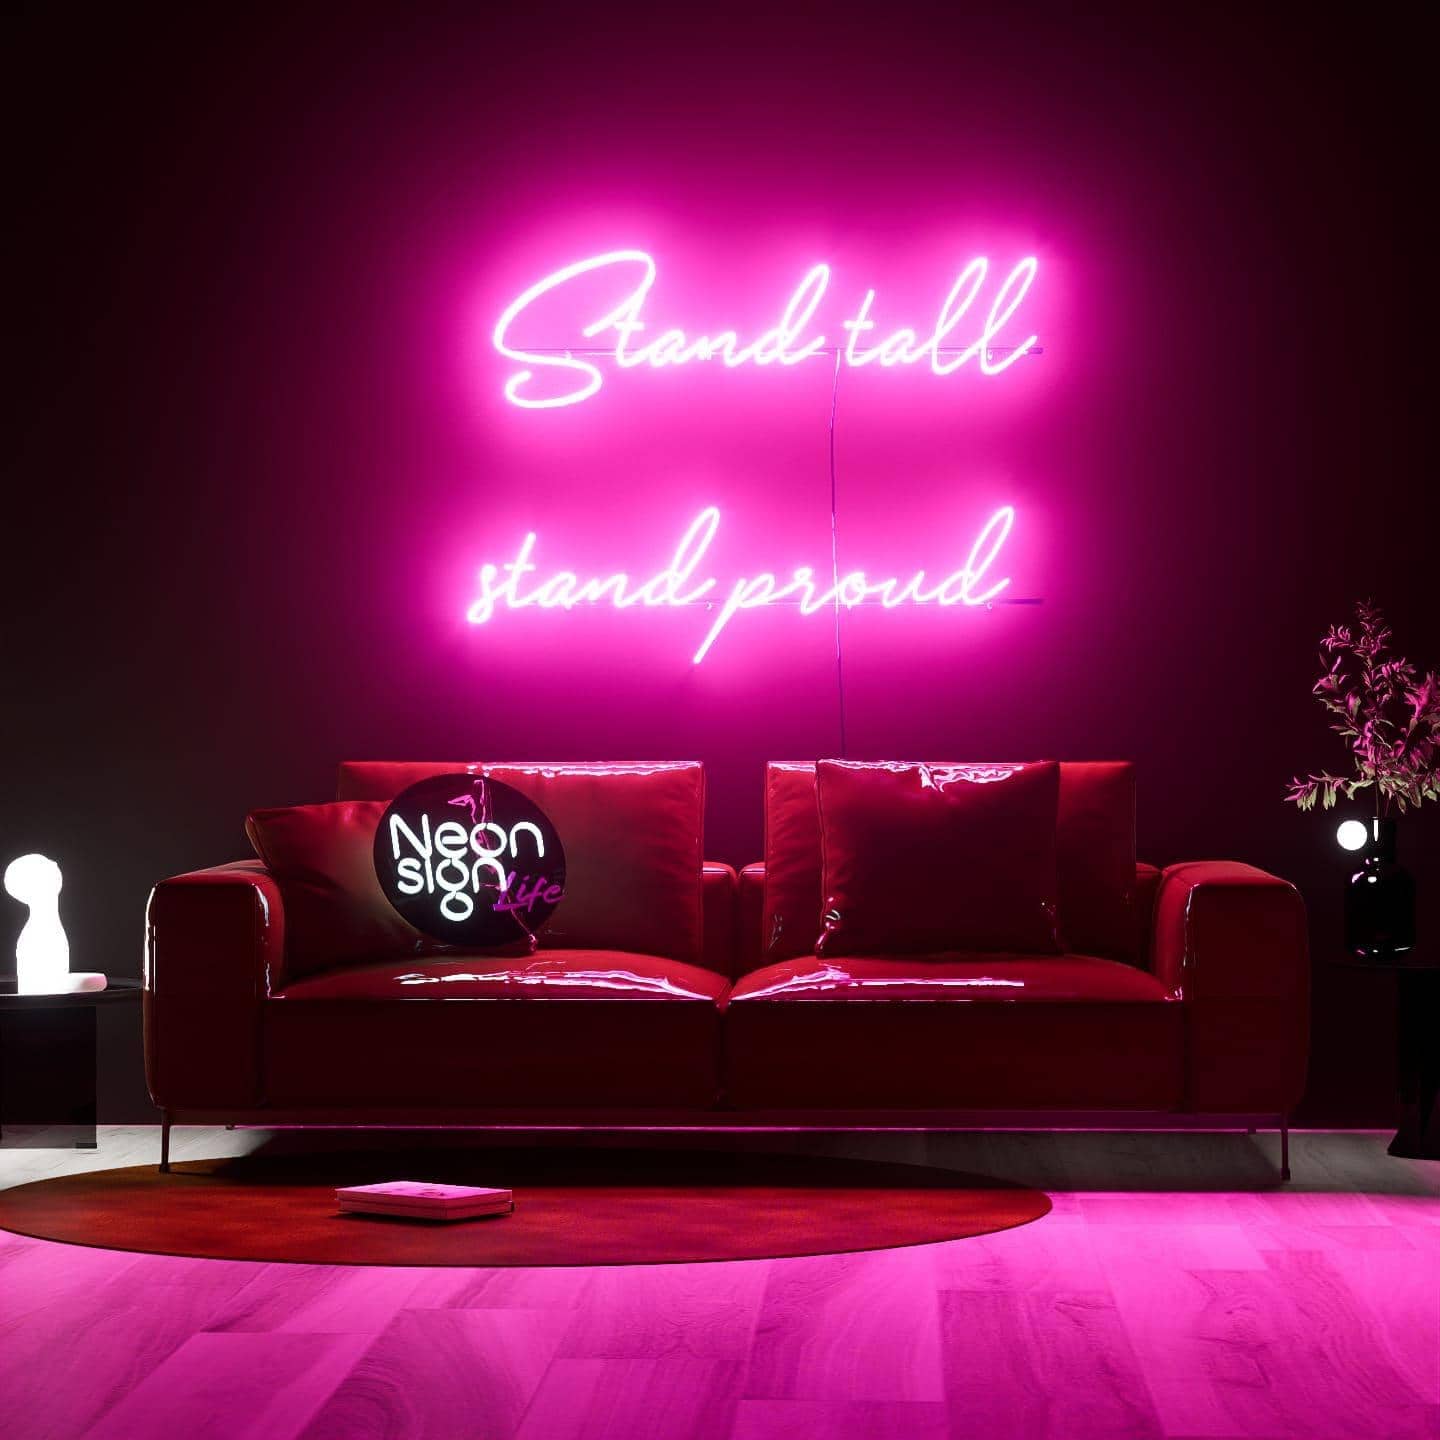 light-up-pink-neon-lights-hanging-on-the-wall-for-display-at-night-stand-tall,-stand-proud